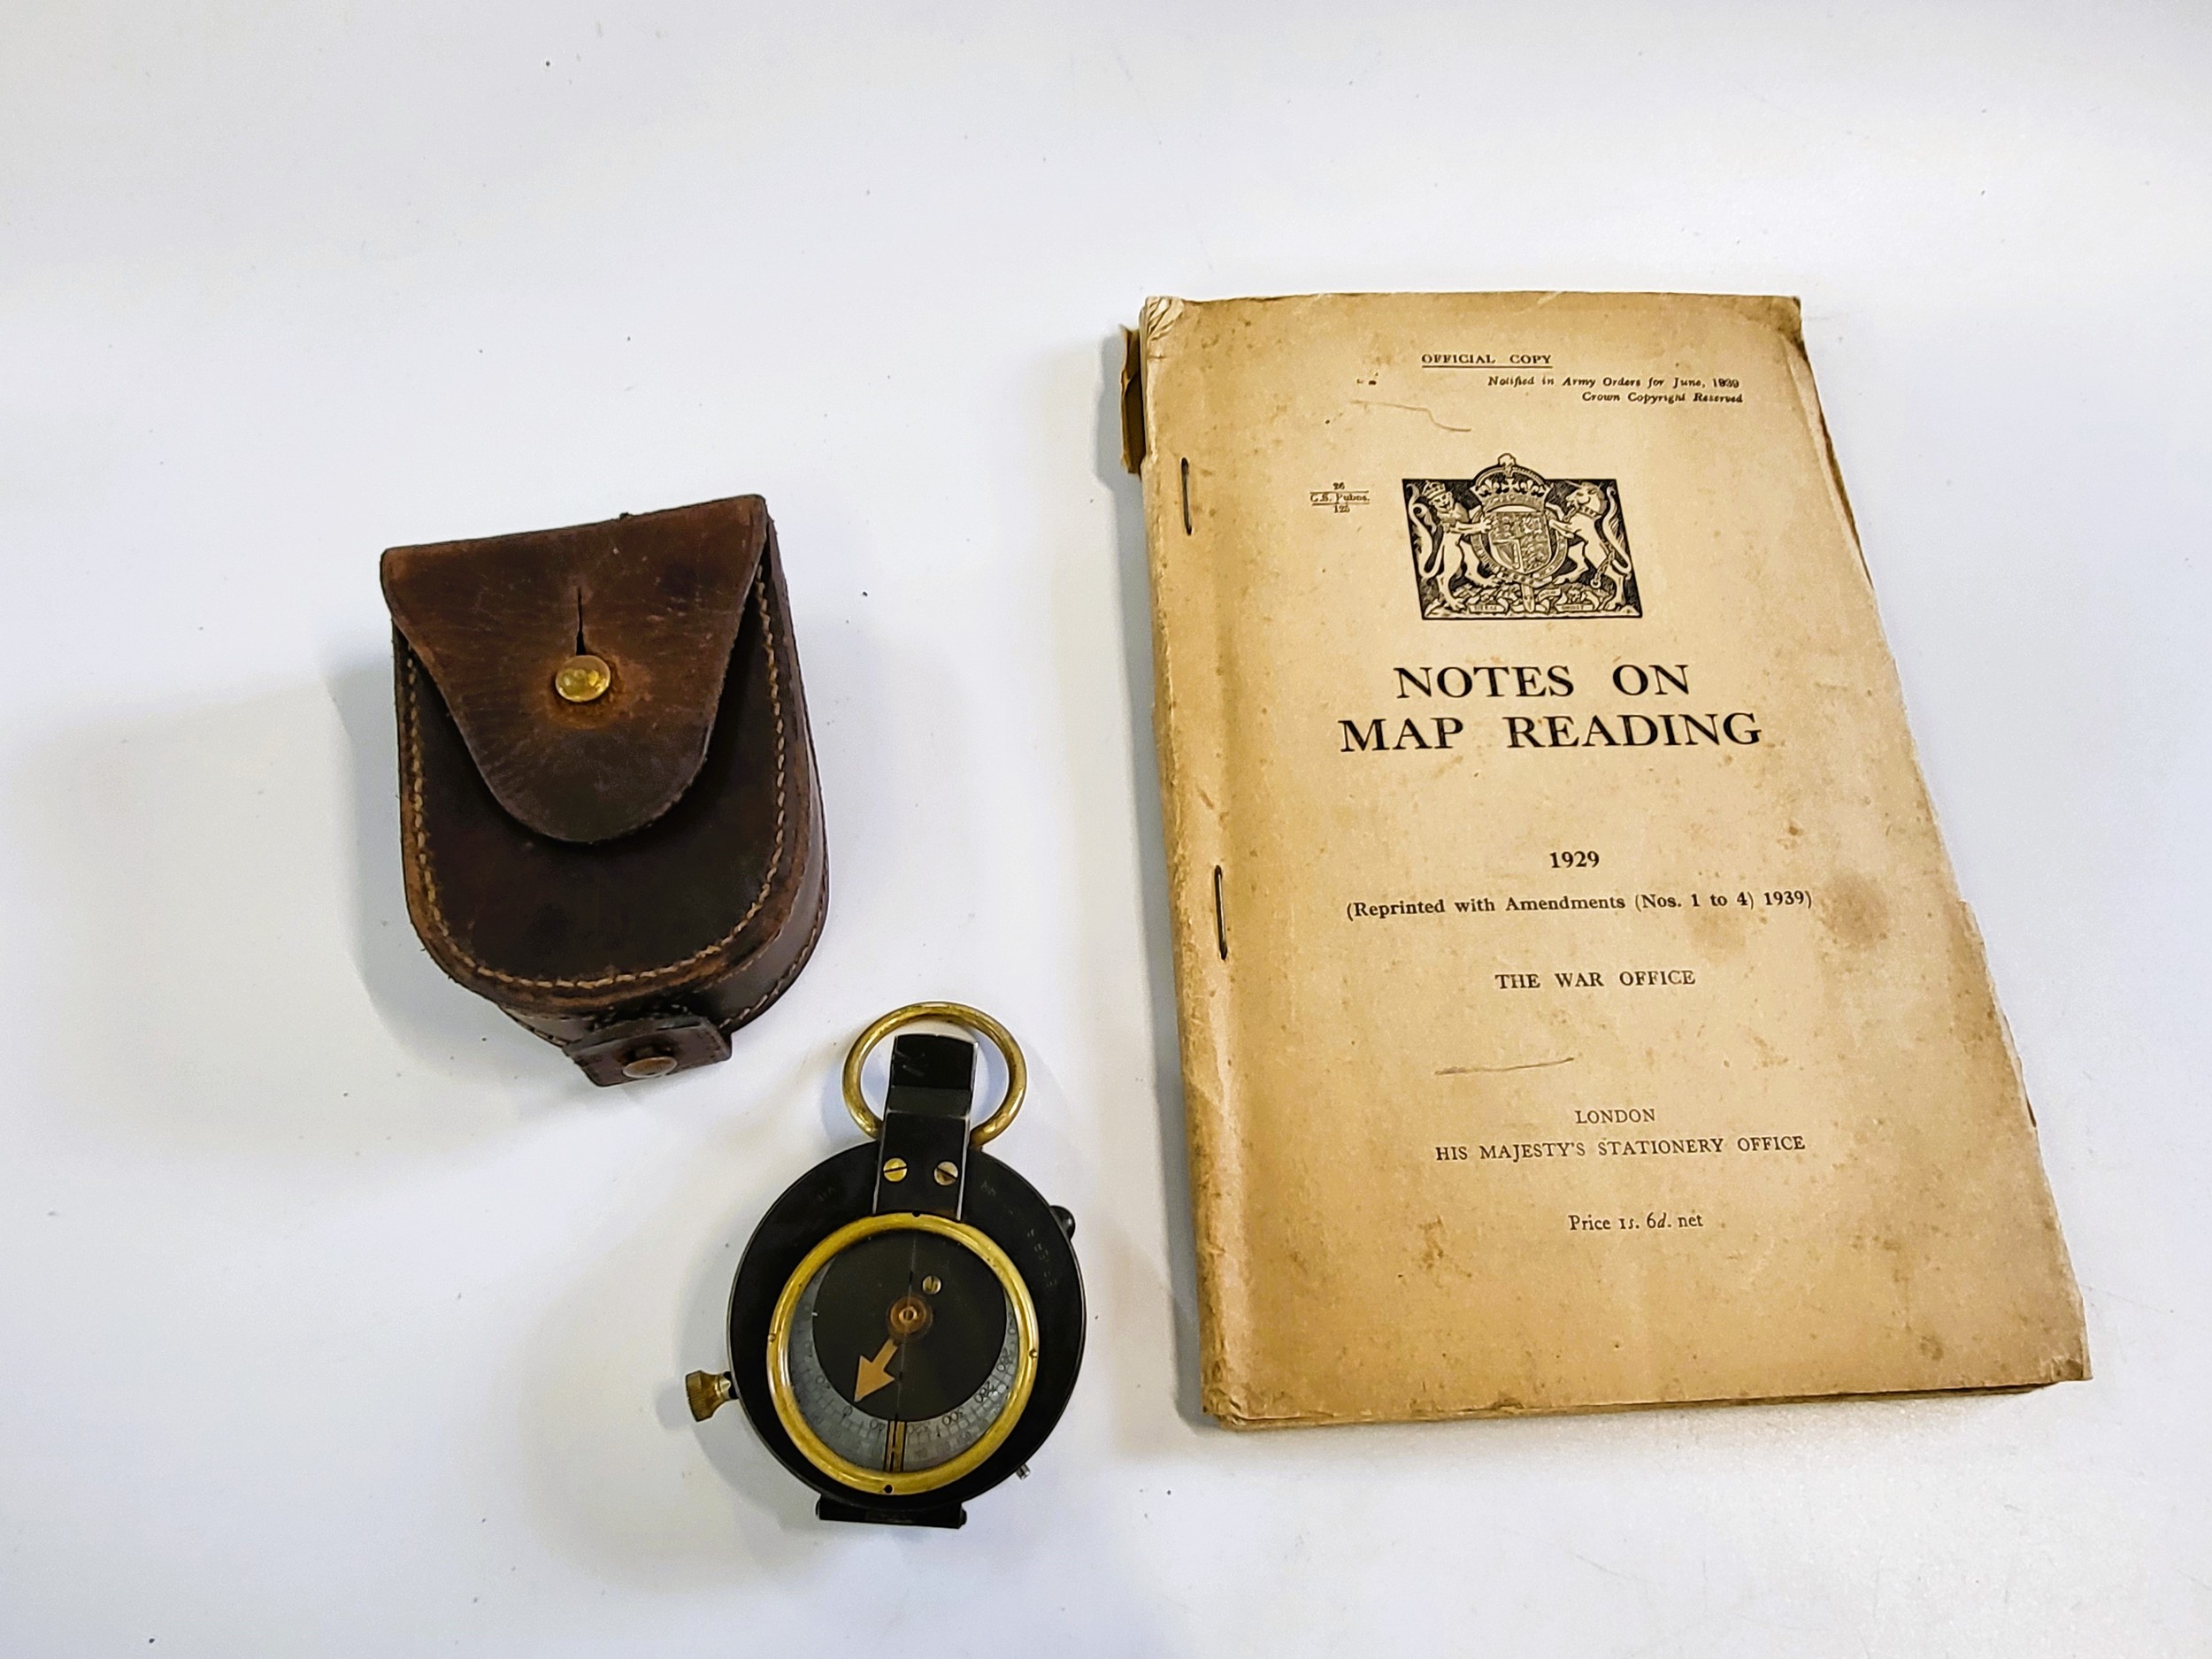 A WWI compass and notes on map reading (dated 1917)